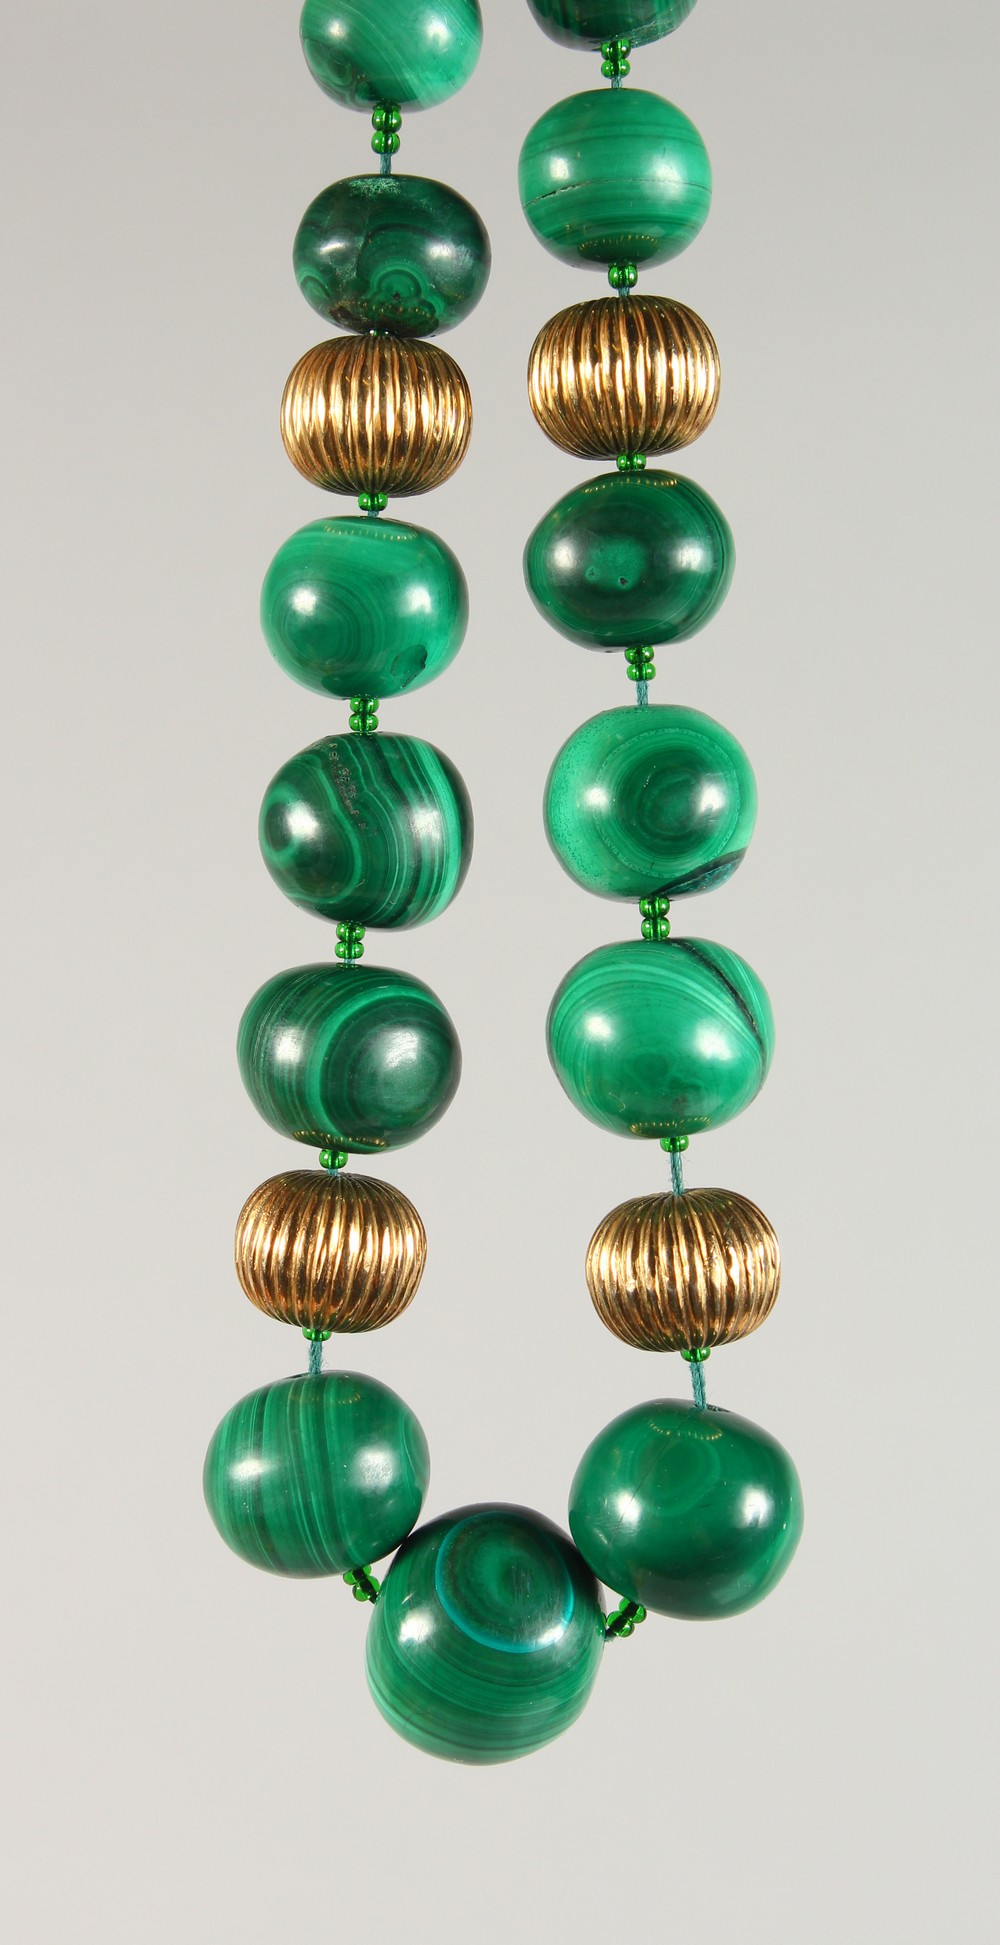 A GOOD CHINESE GREEN JADE / JADE LIKE SPHERICAL NECKLACE / BEADS 46CM,